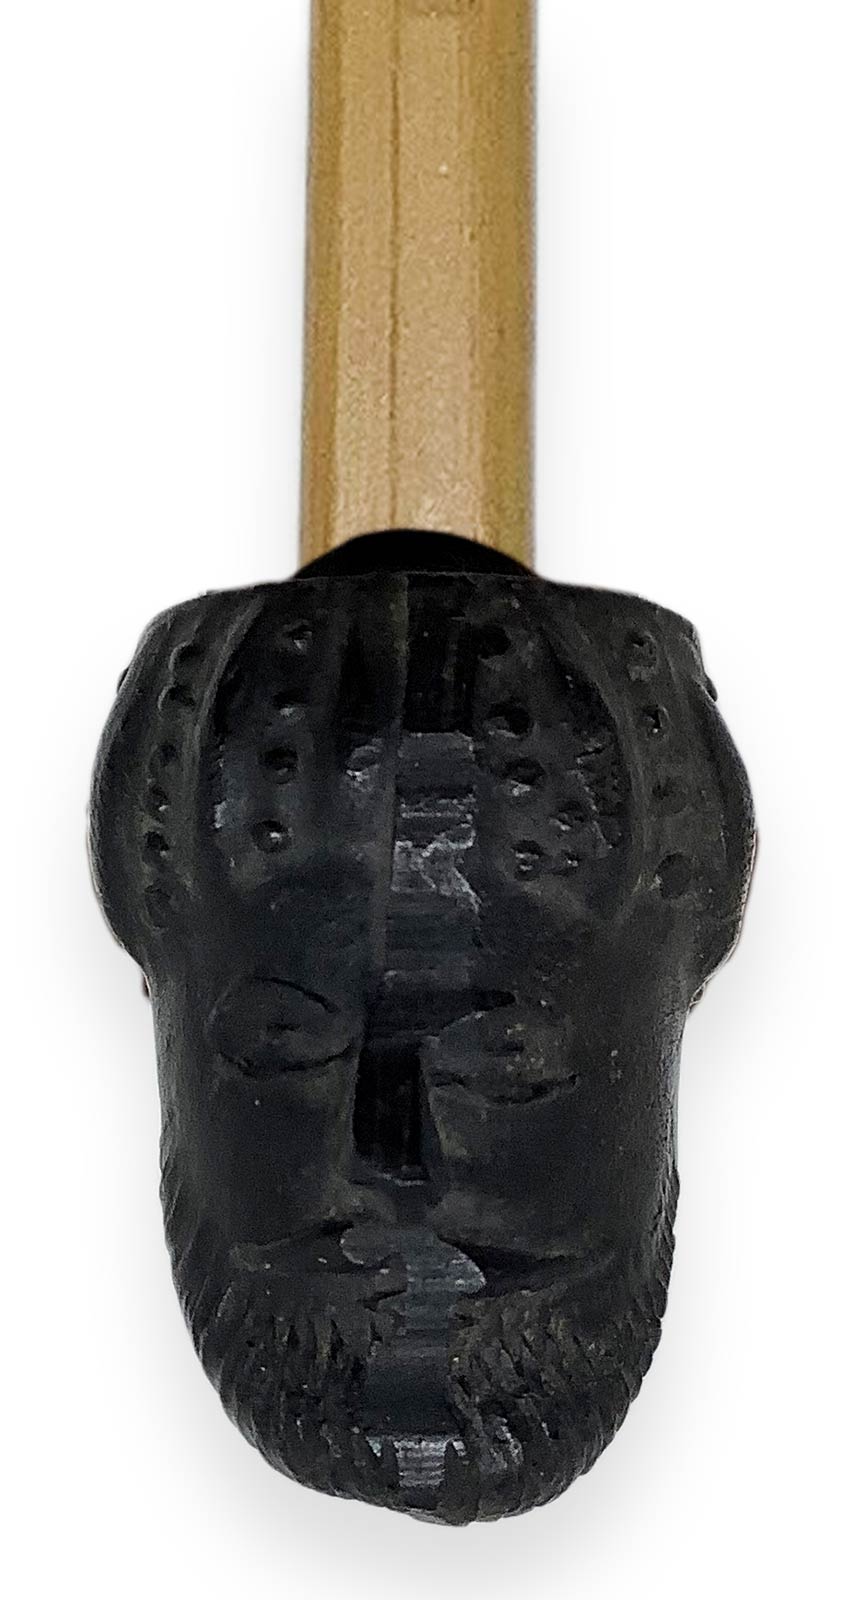 Pipe "Arab Emir" - Turkey. Late 1800s. with clay tobacco chamber and shank, ebonite mouthpiece with - Image 4 of 5